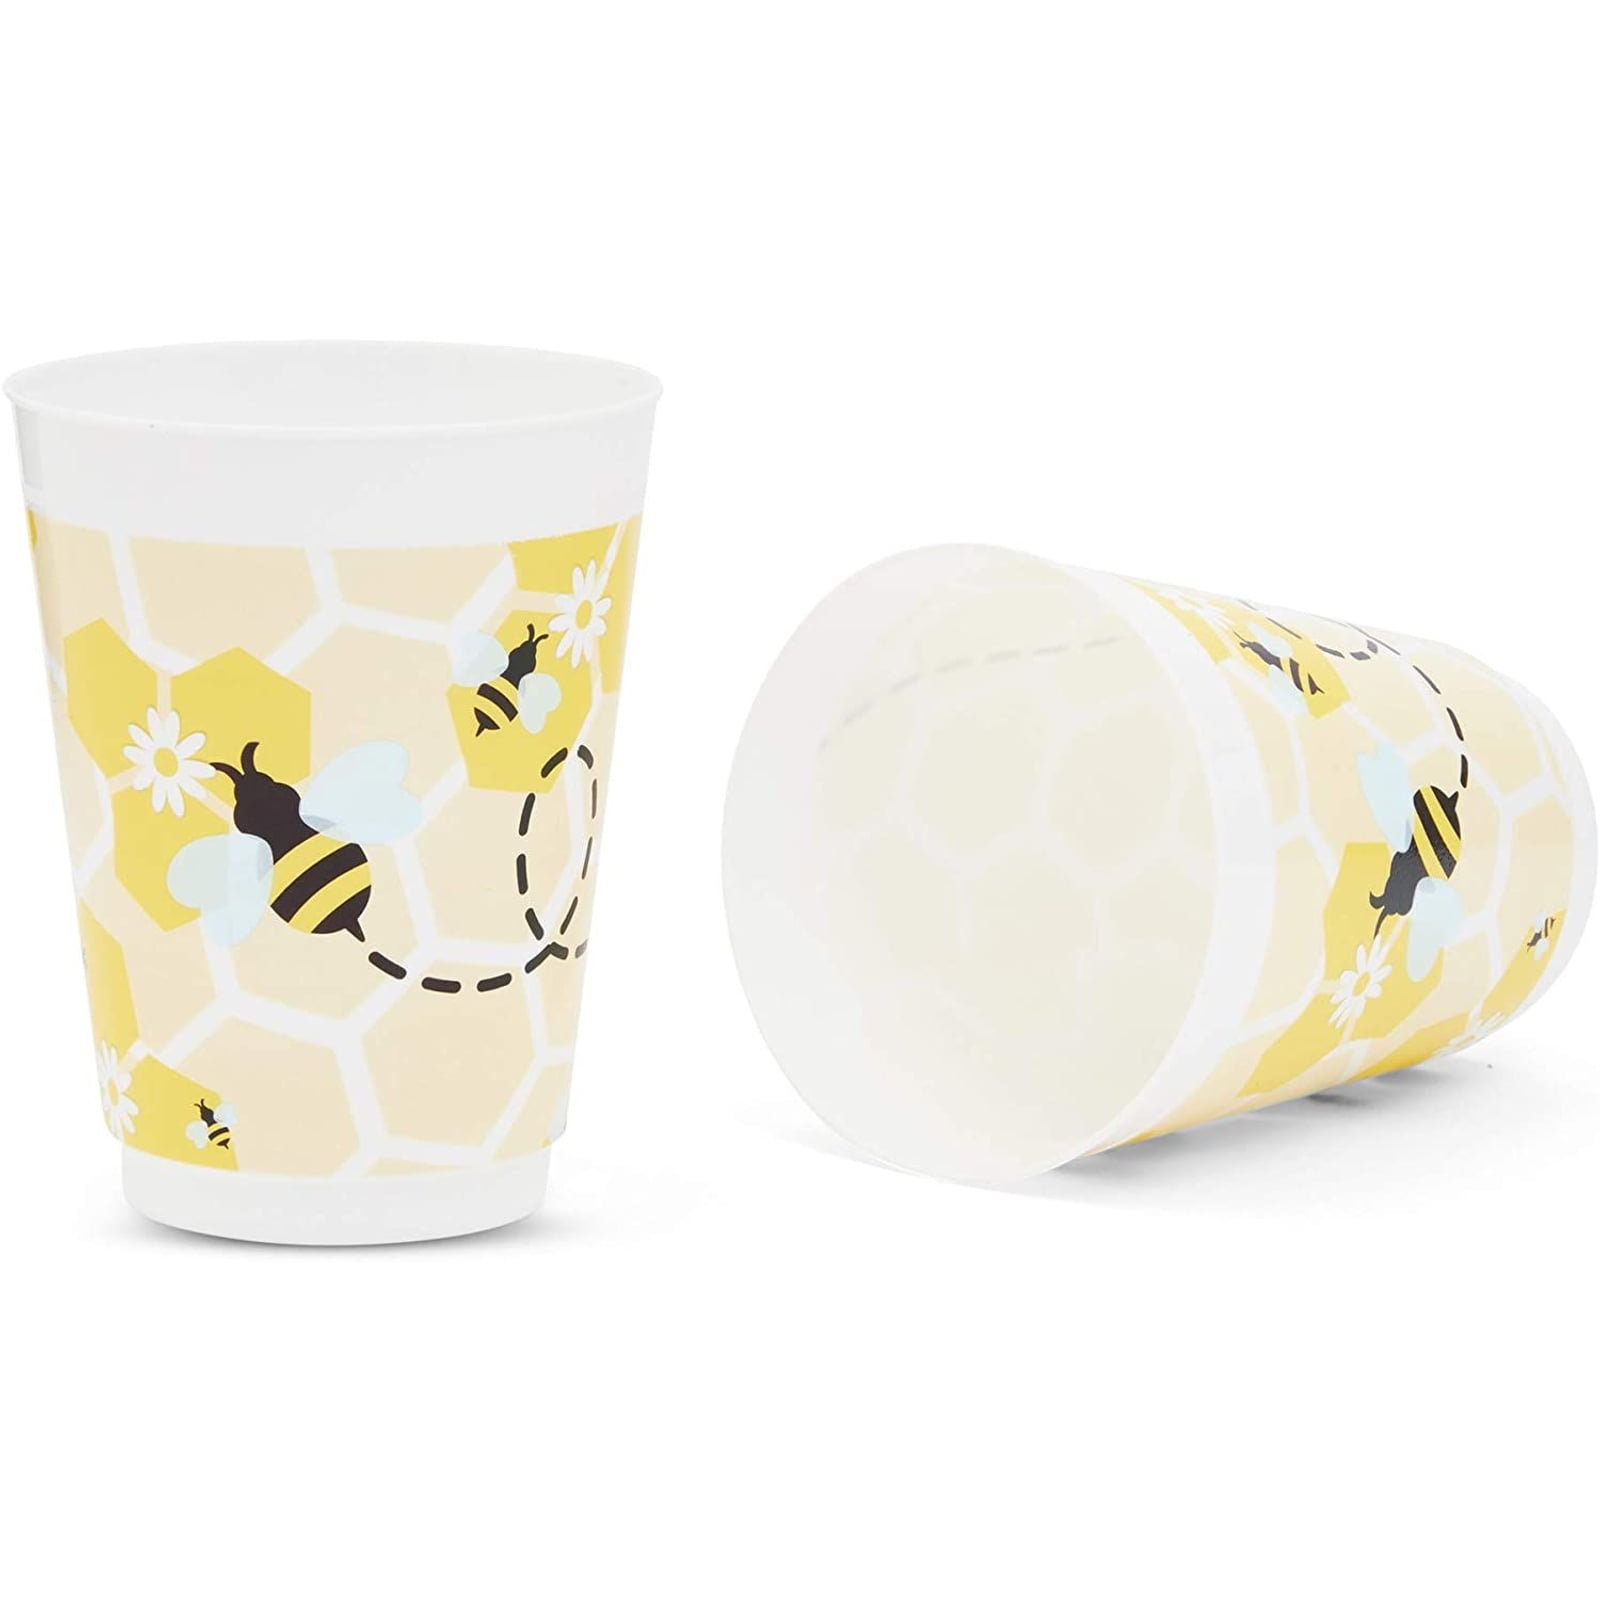 Turbo Bee 300 Pack 3 OZ Clear Plastic Cups，Disposable Bathroom